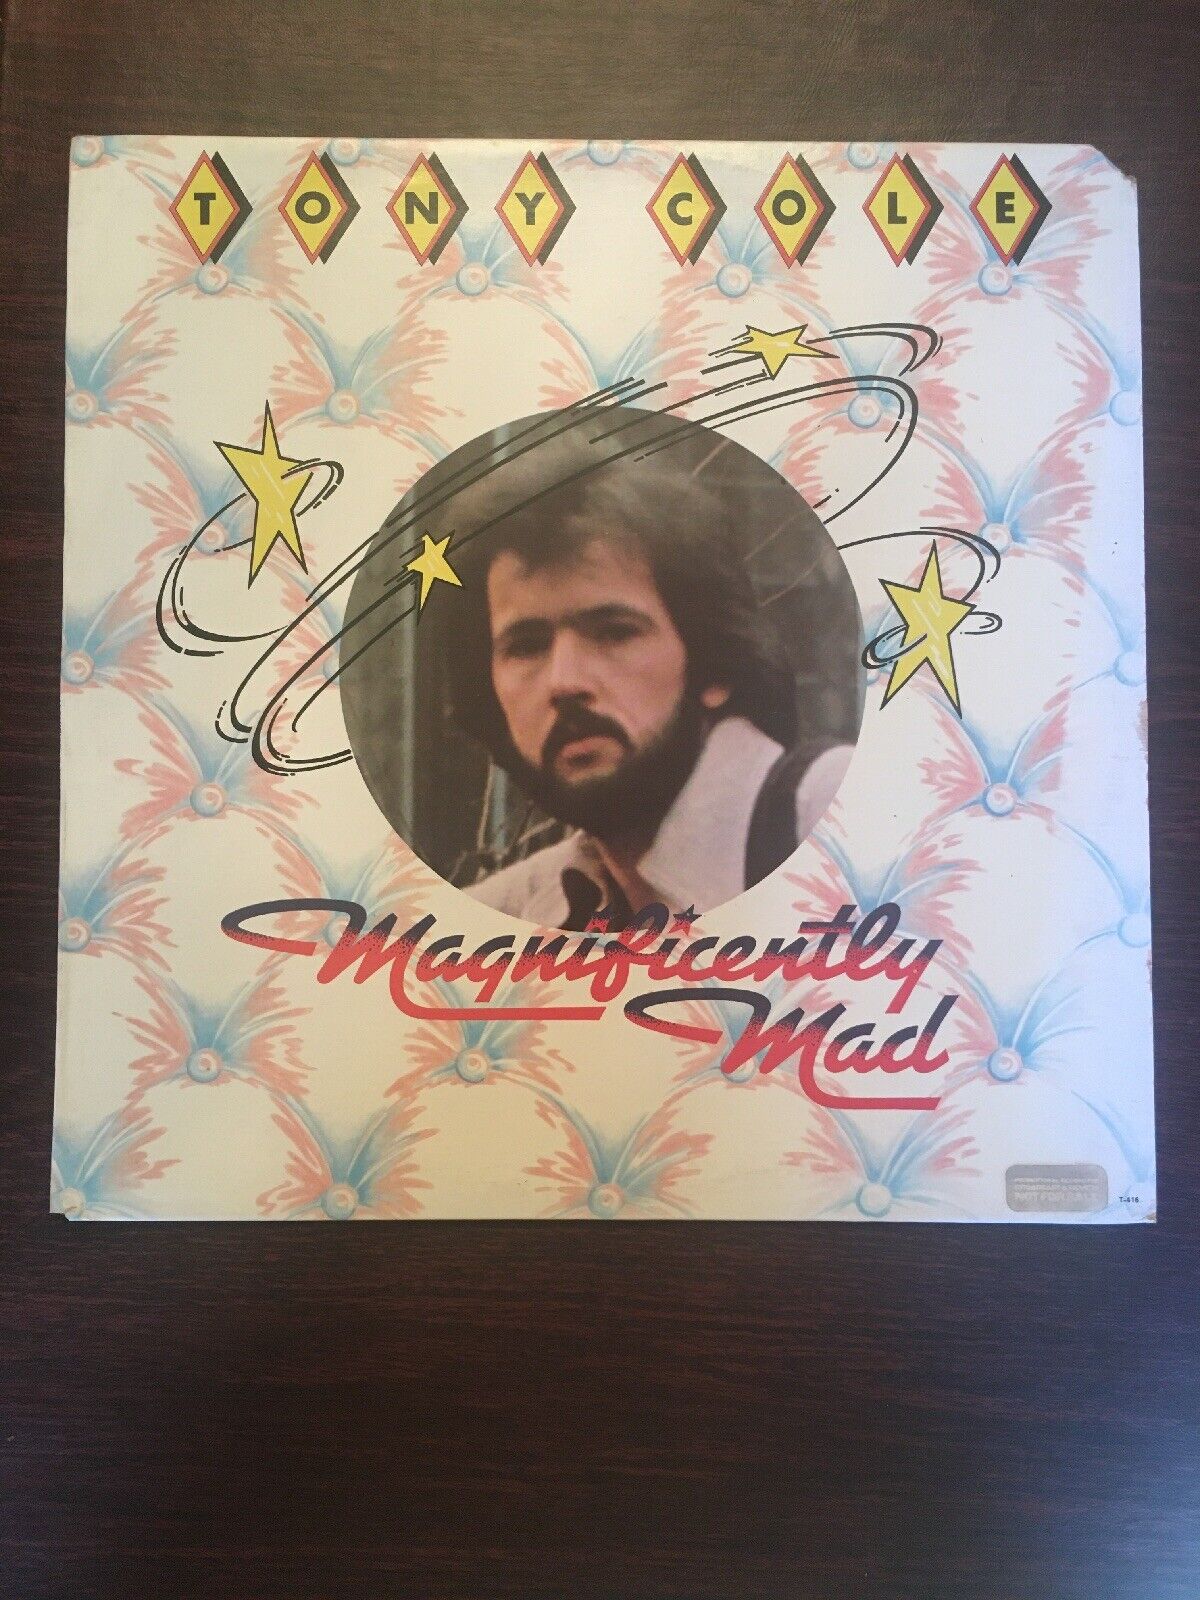 TONY COLE Magnificently Mad vinyl LP 20th Century T-416 Promotional Copy